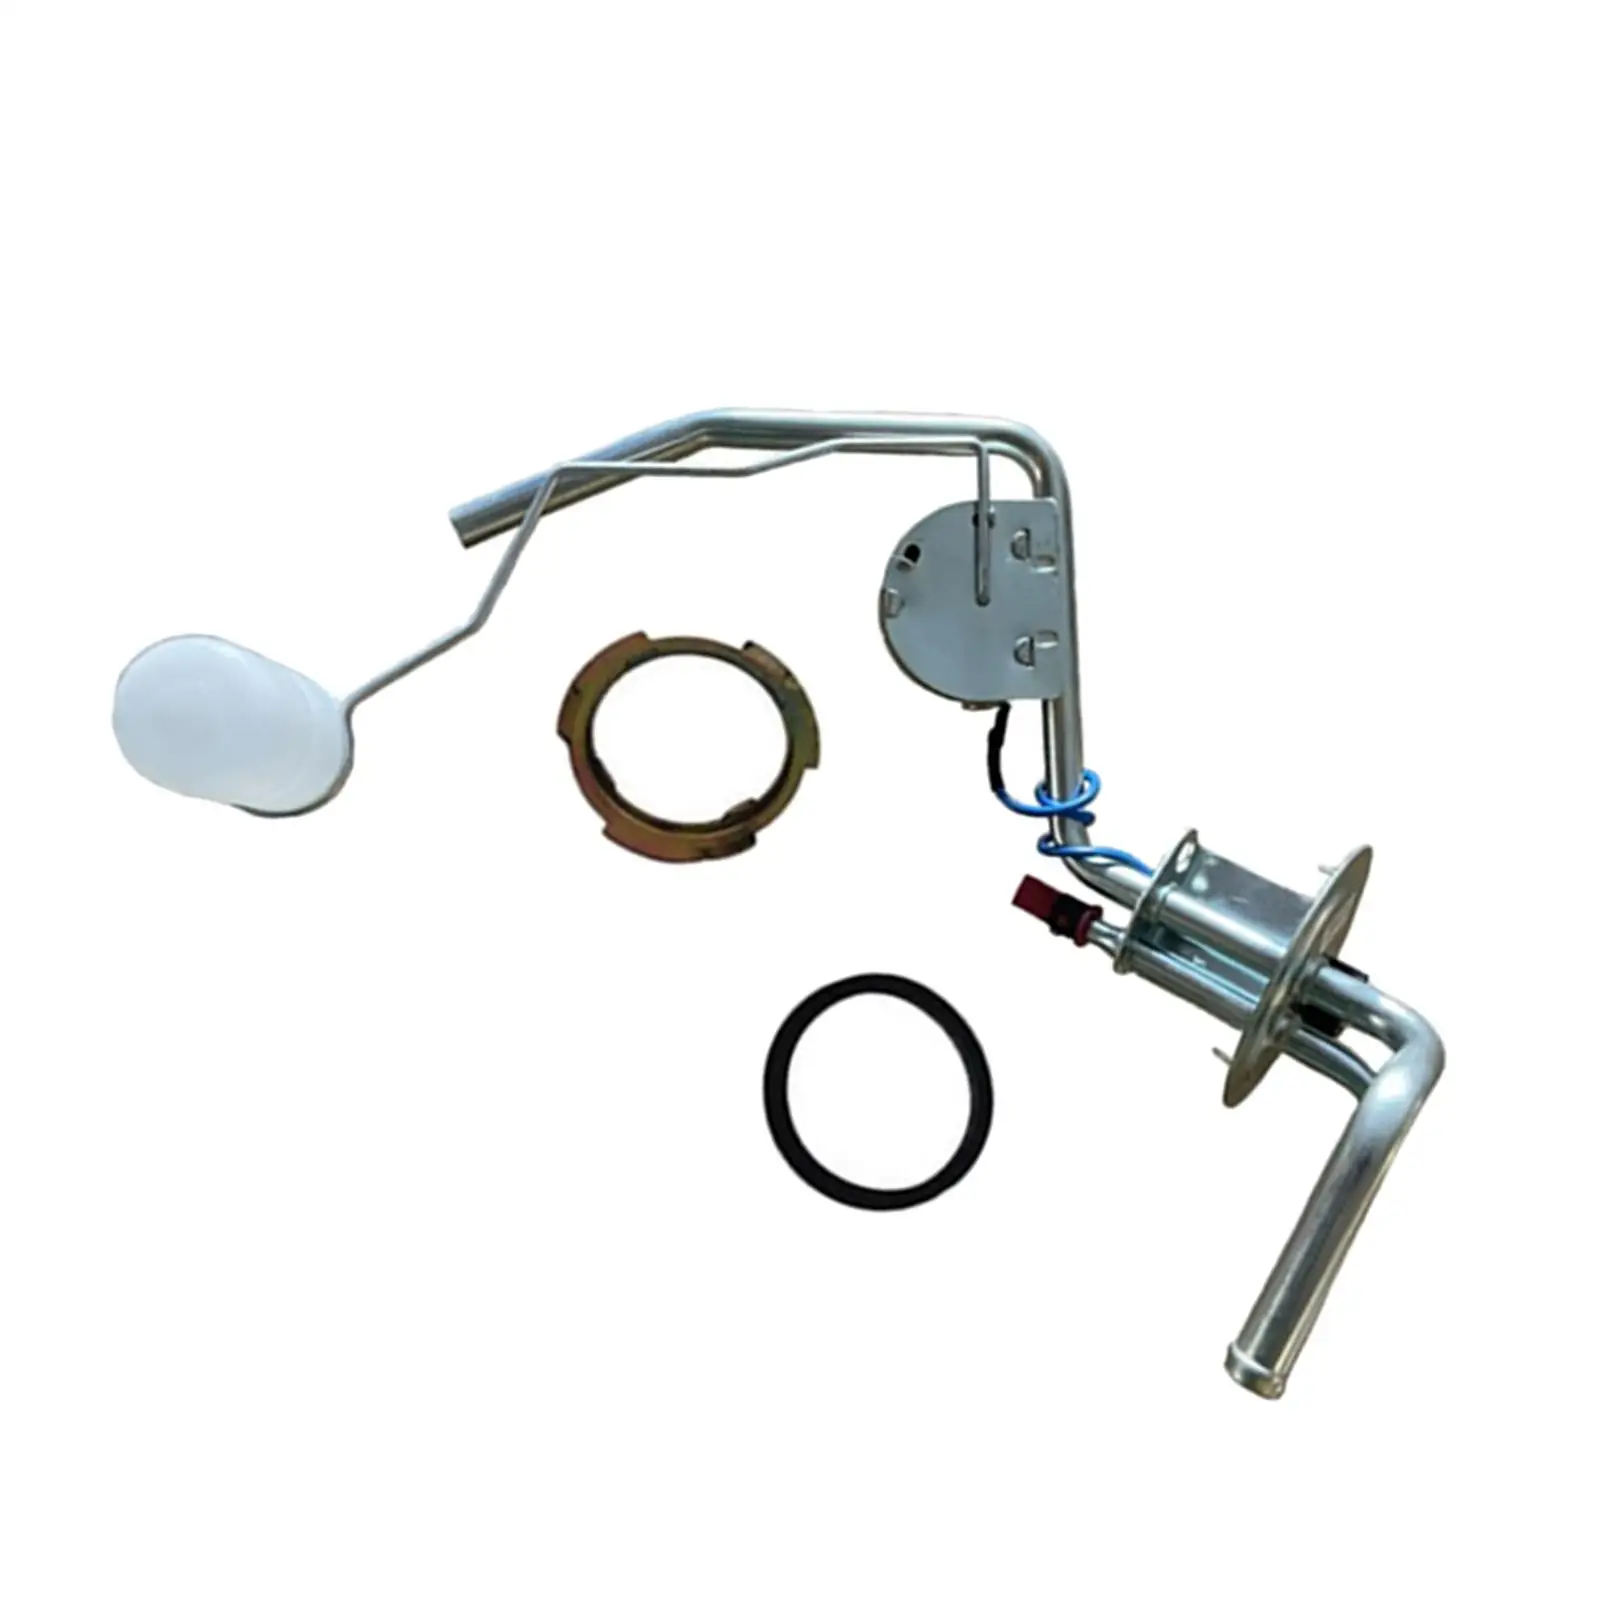 Rear Fuel Tank Sending Unit Repair Parts for Ford F250 F350 Easy Installation